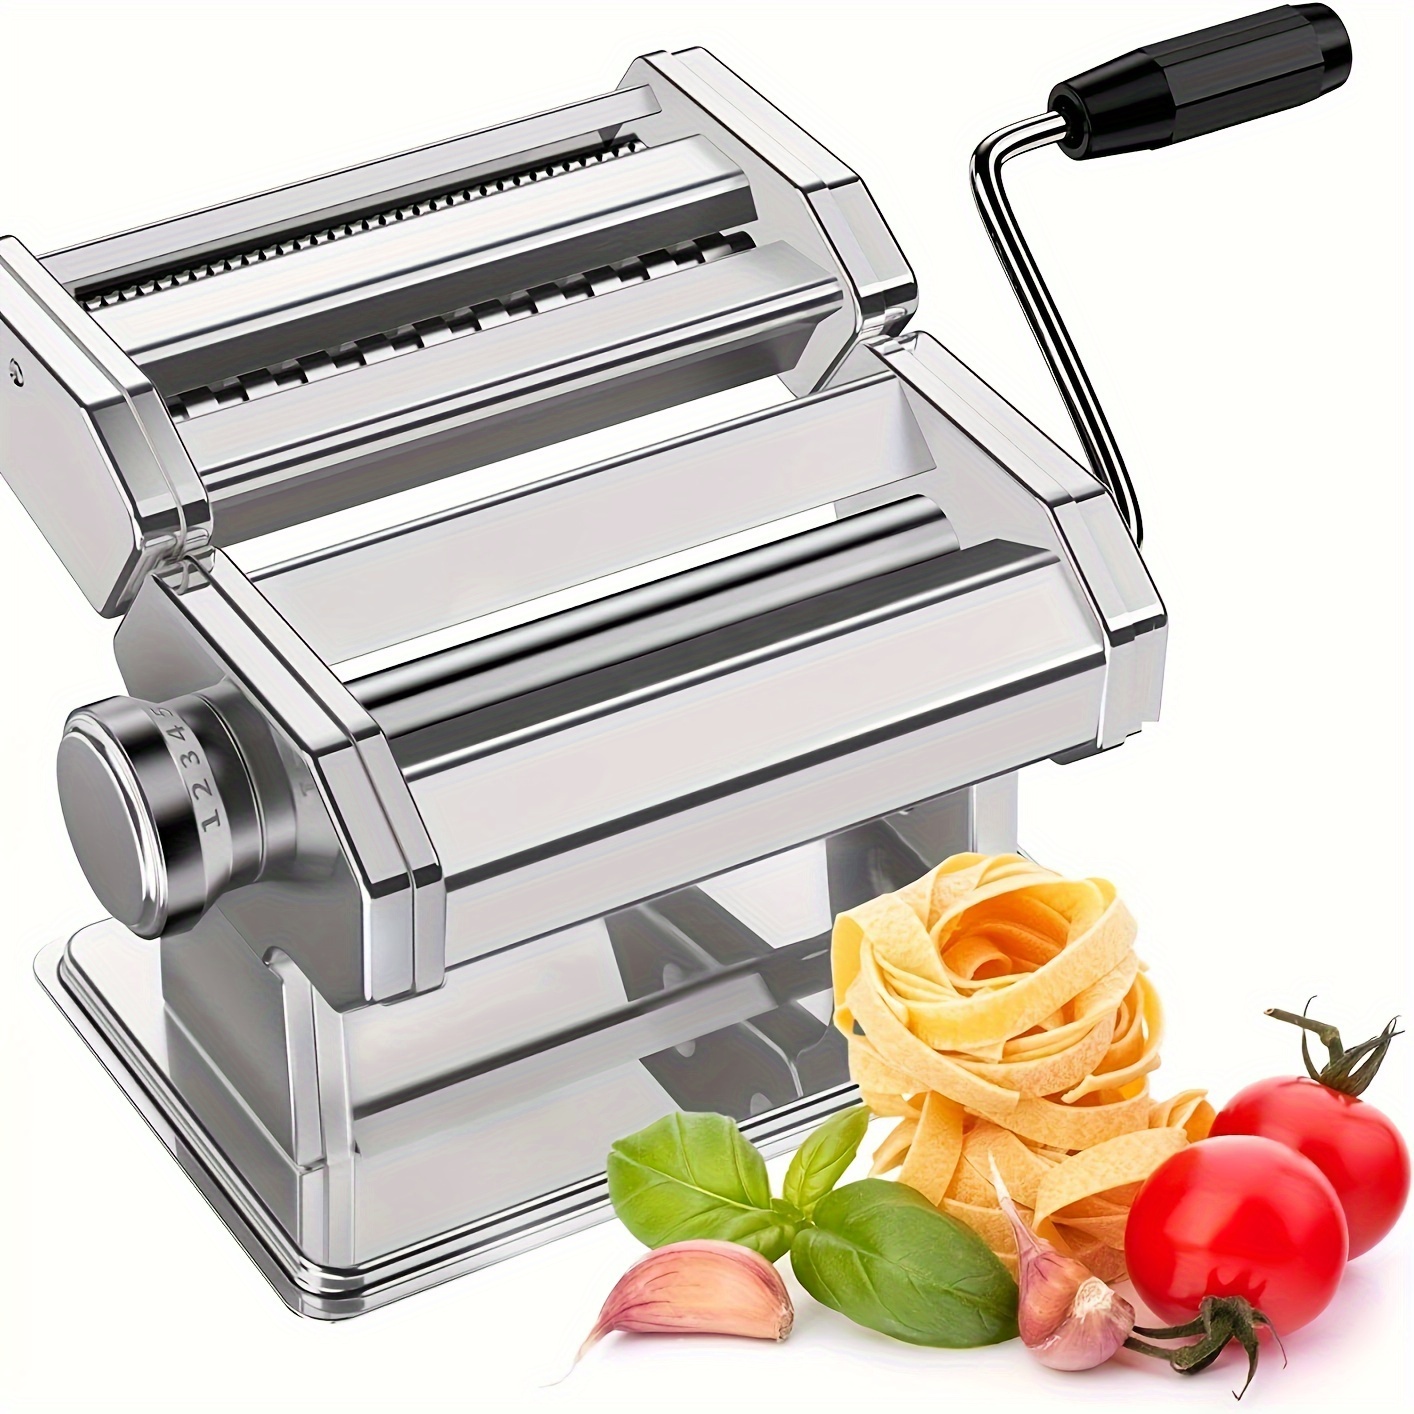 Pasta Maker Machine, Roller Pasta Maker, 7 Adjustable Thickness Settings  Manual Noodles Maker with Removable Handle,Perfect for Homemade Pasta